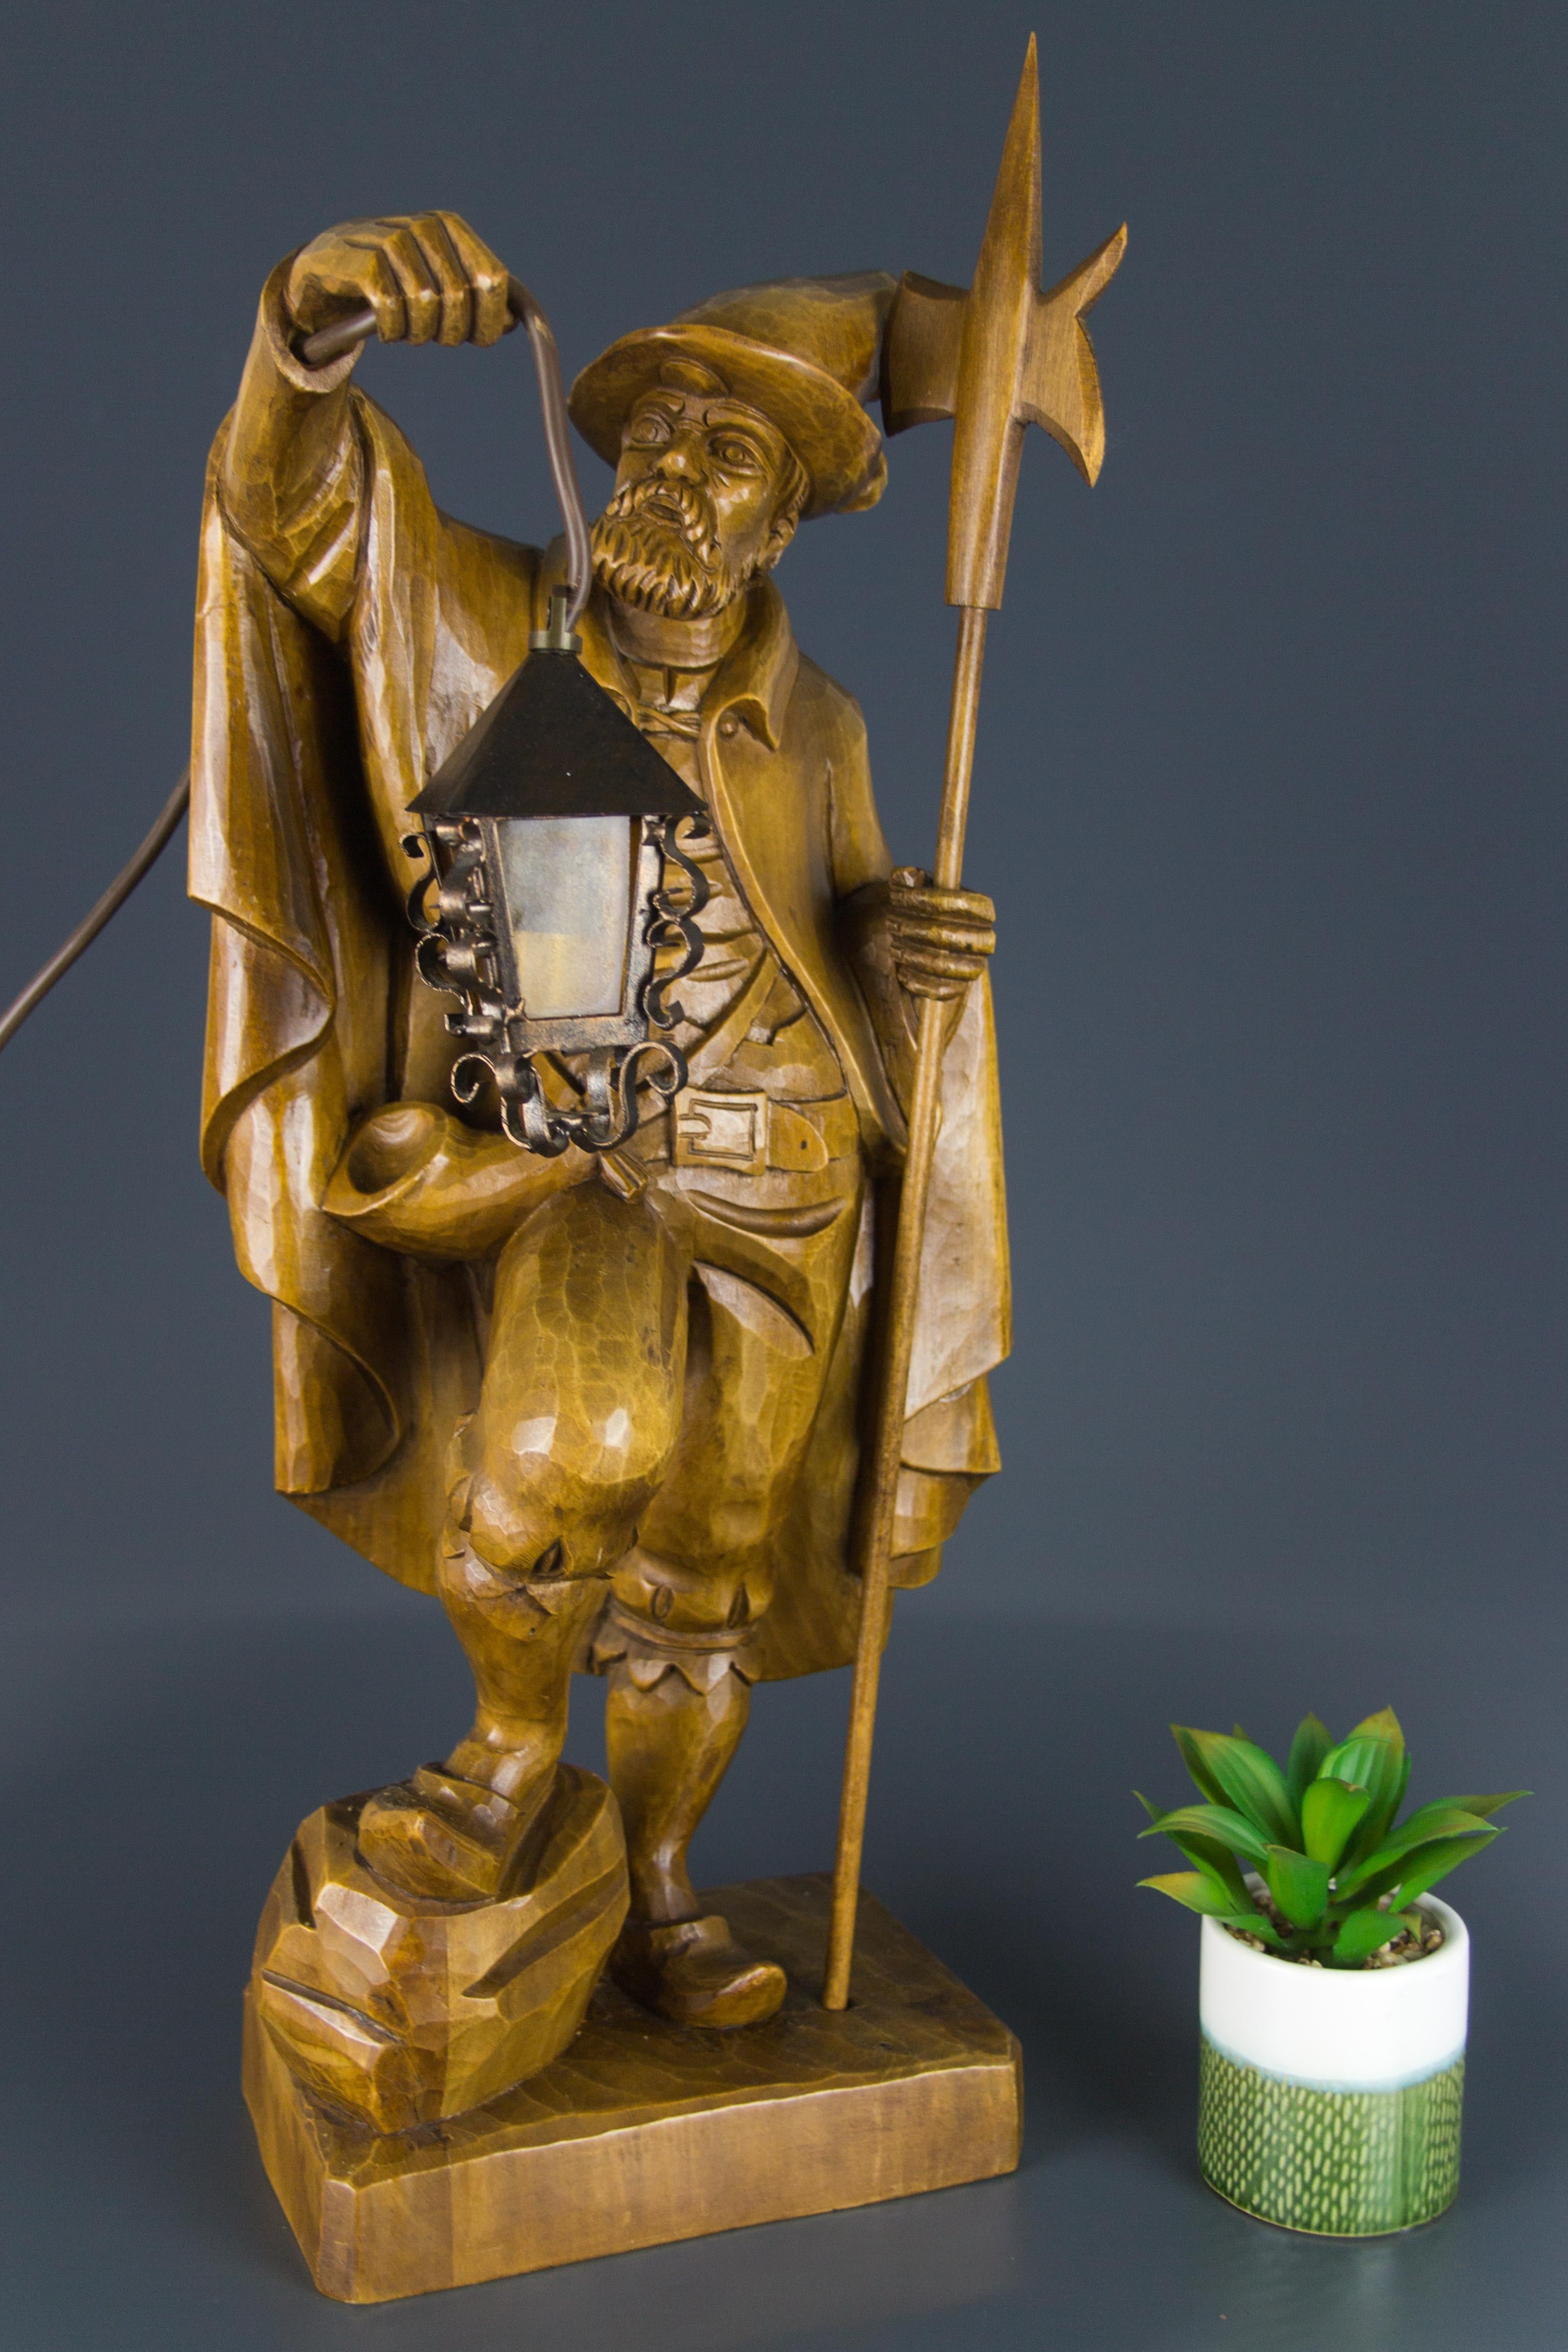 German Hand Carved Wooden Figurative Sculpture Lamp Night Watchman with Lantern 12